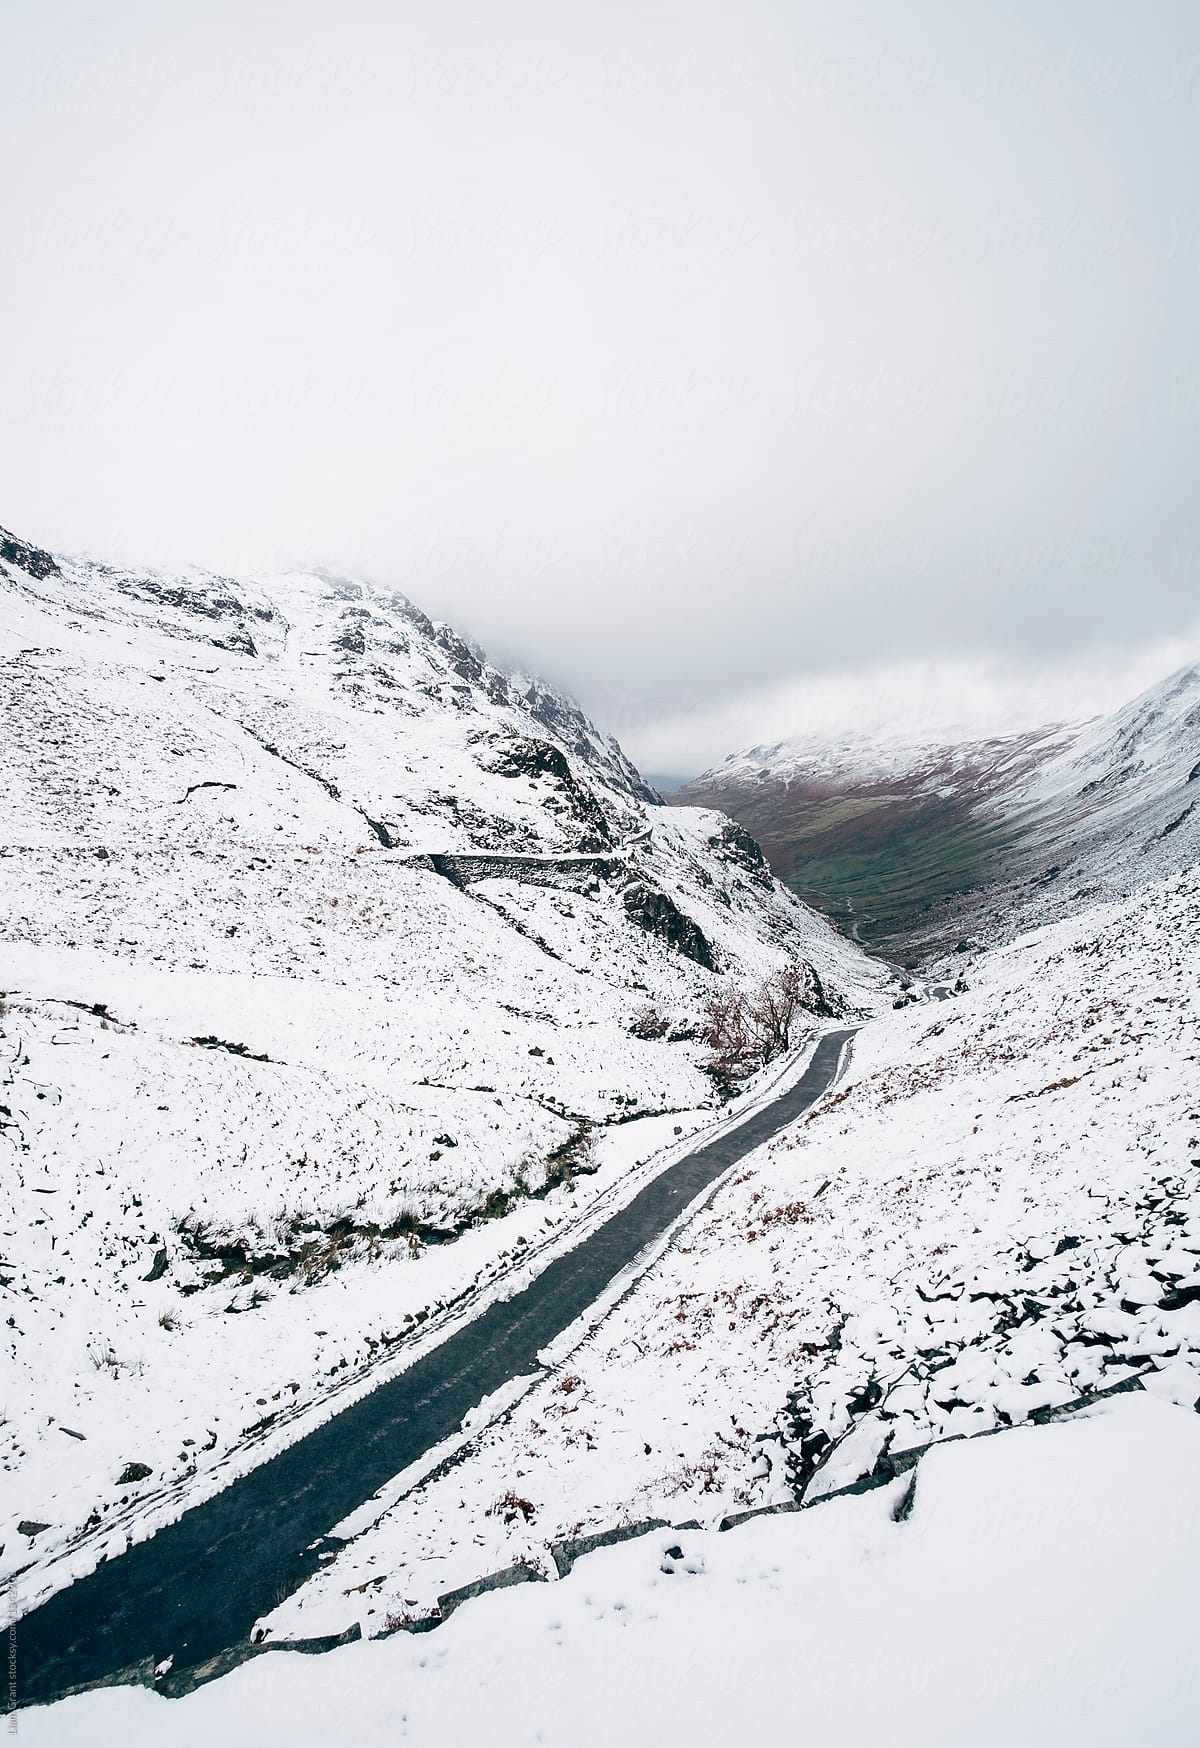 Road through a mountain pass in snow. Honister Pass, Cumbria, UK